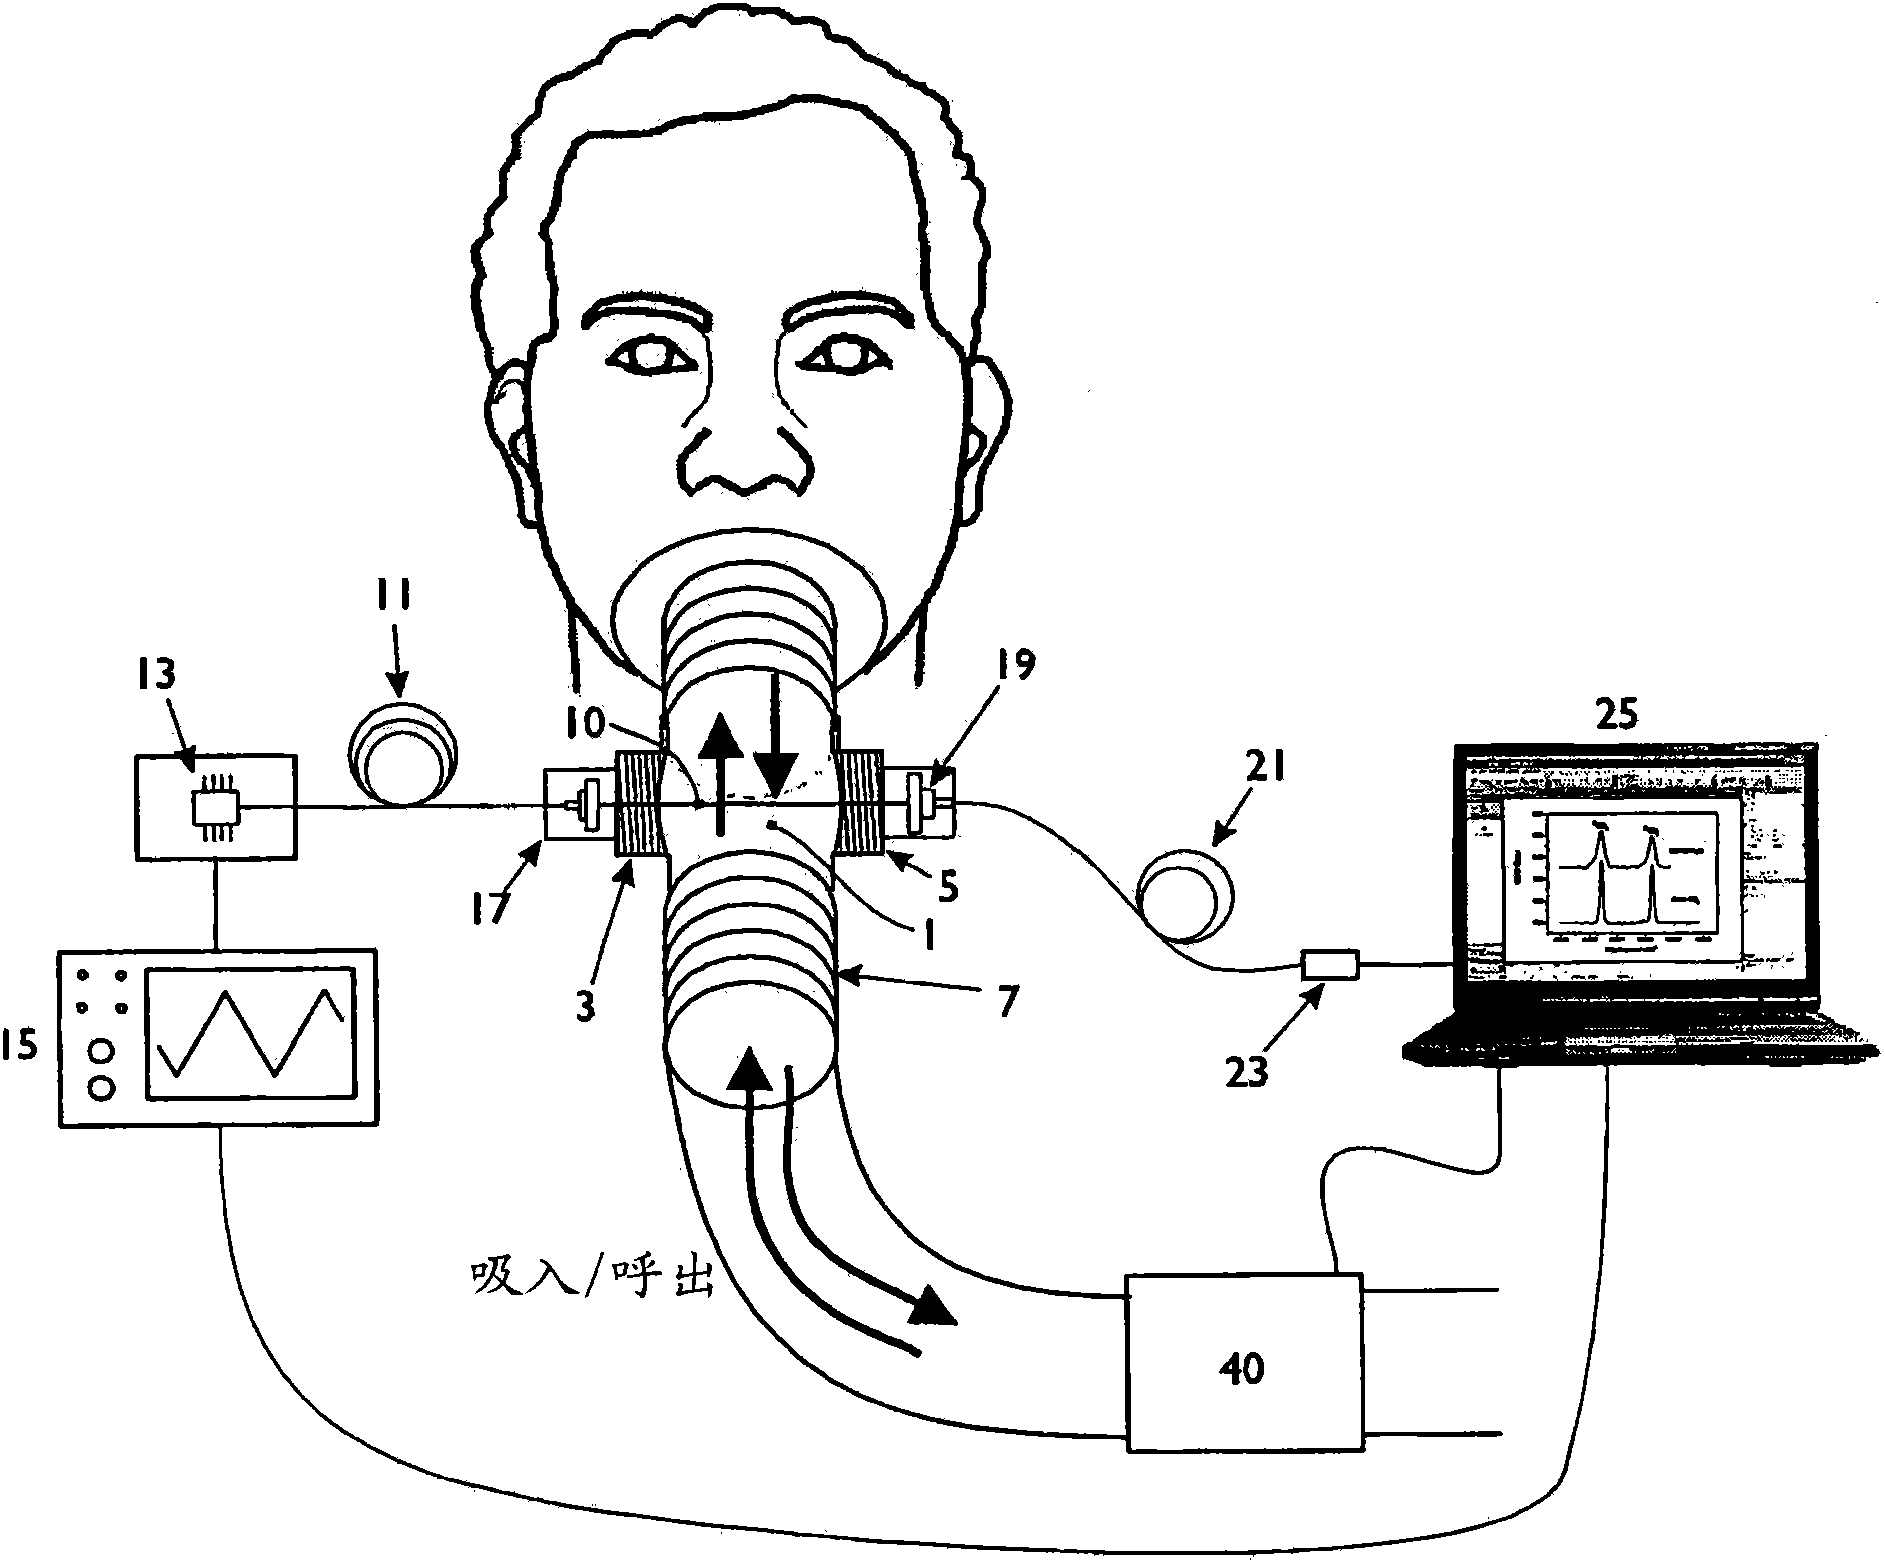 Apparatus for measurement of gas concentrations in breath